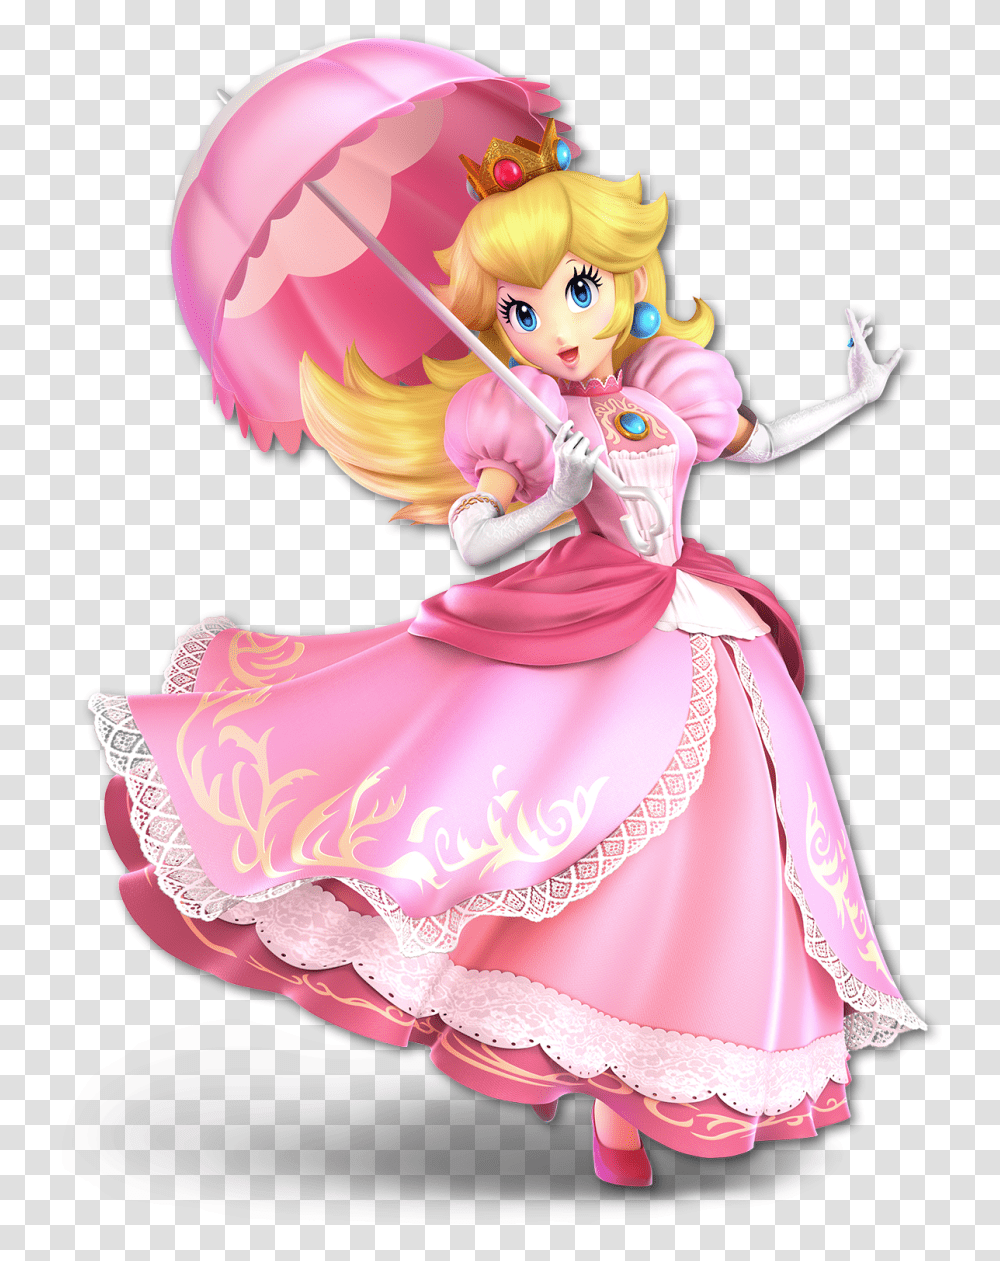 Top 50 Hottest Girls In Video Games Levelskip Peach Super Smash Bros Ultimate, Figurine, Doll, Toy, Art Transparent Png